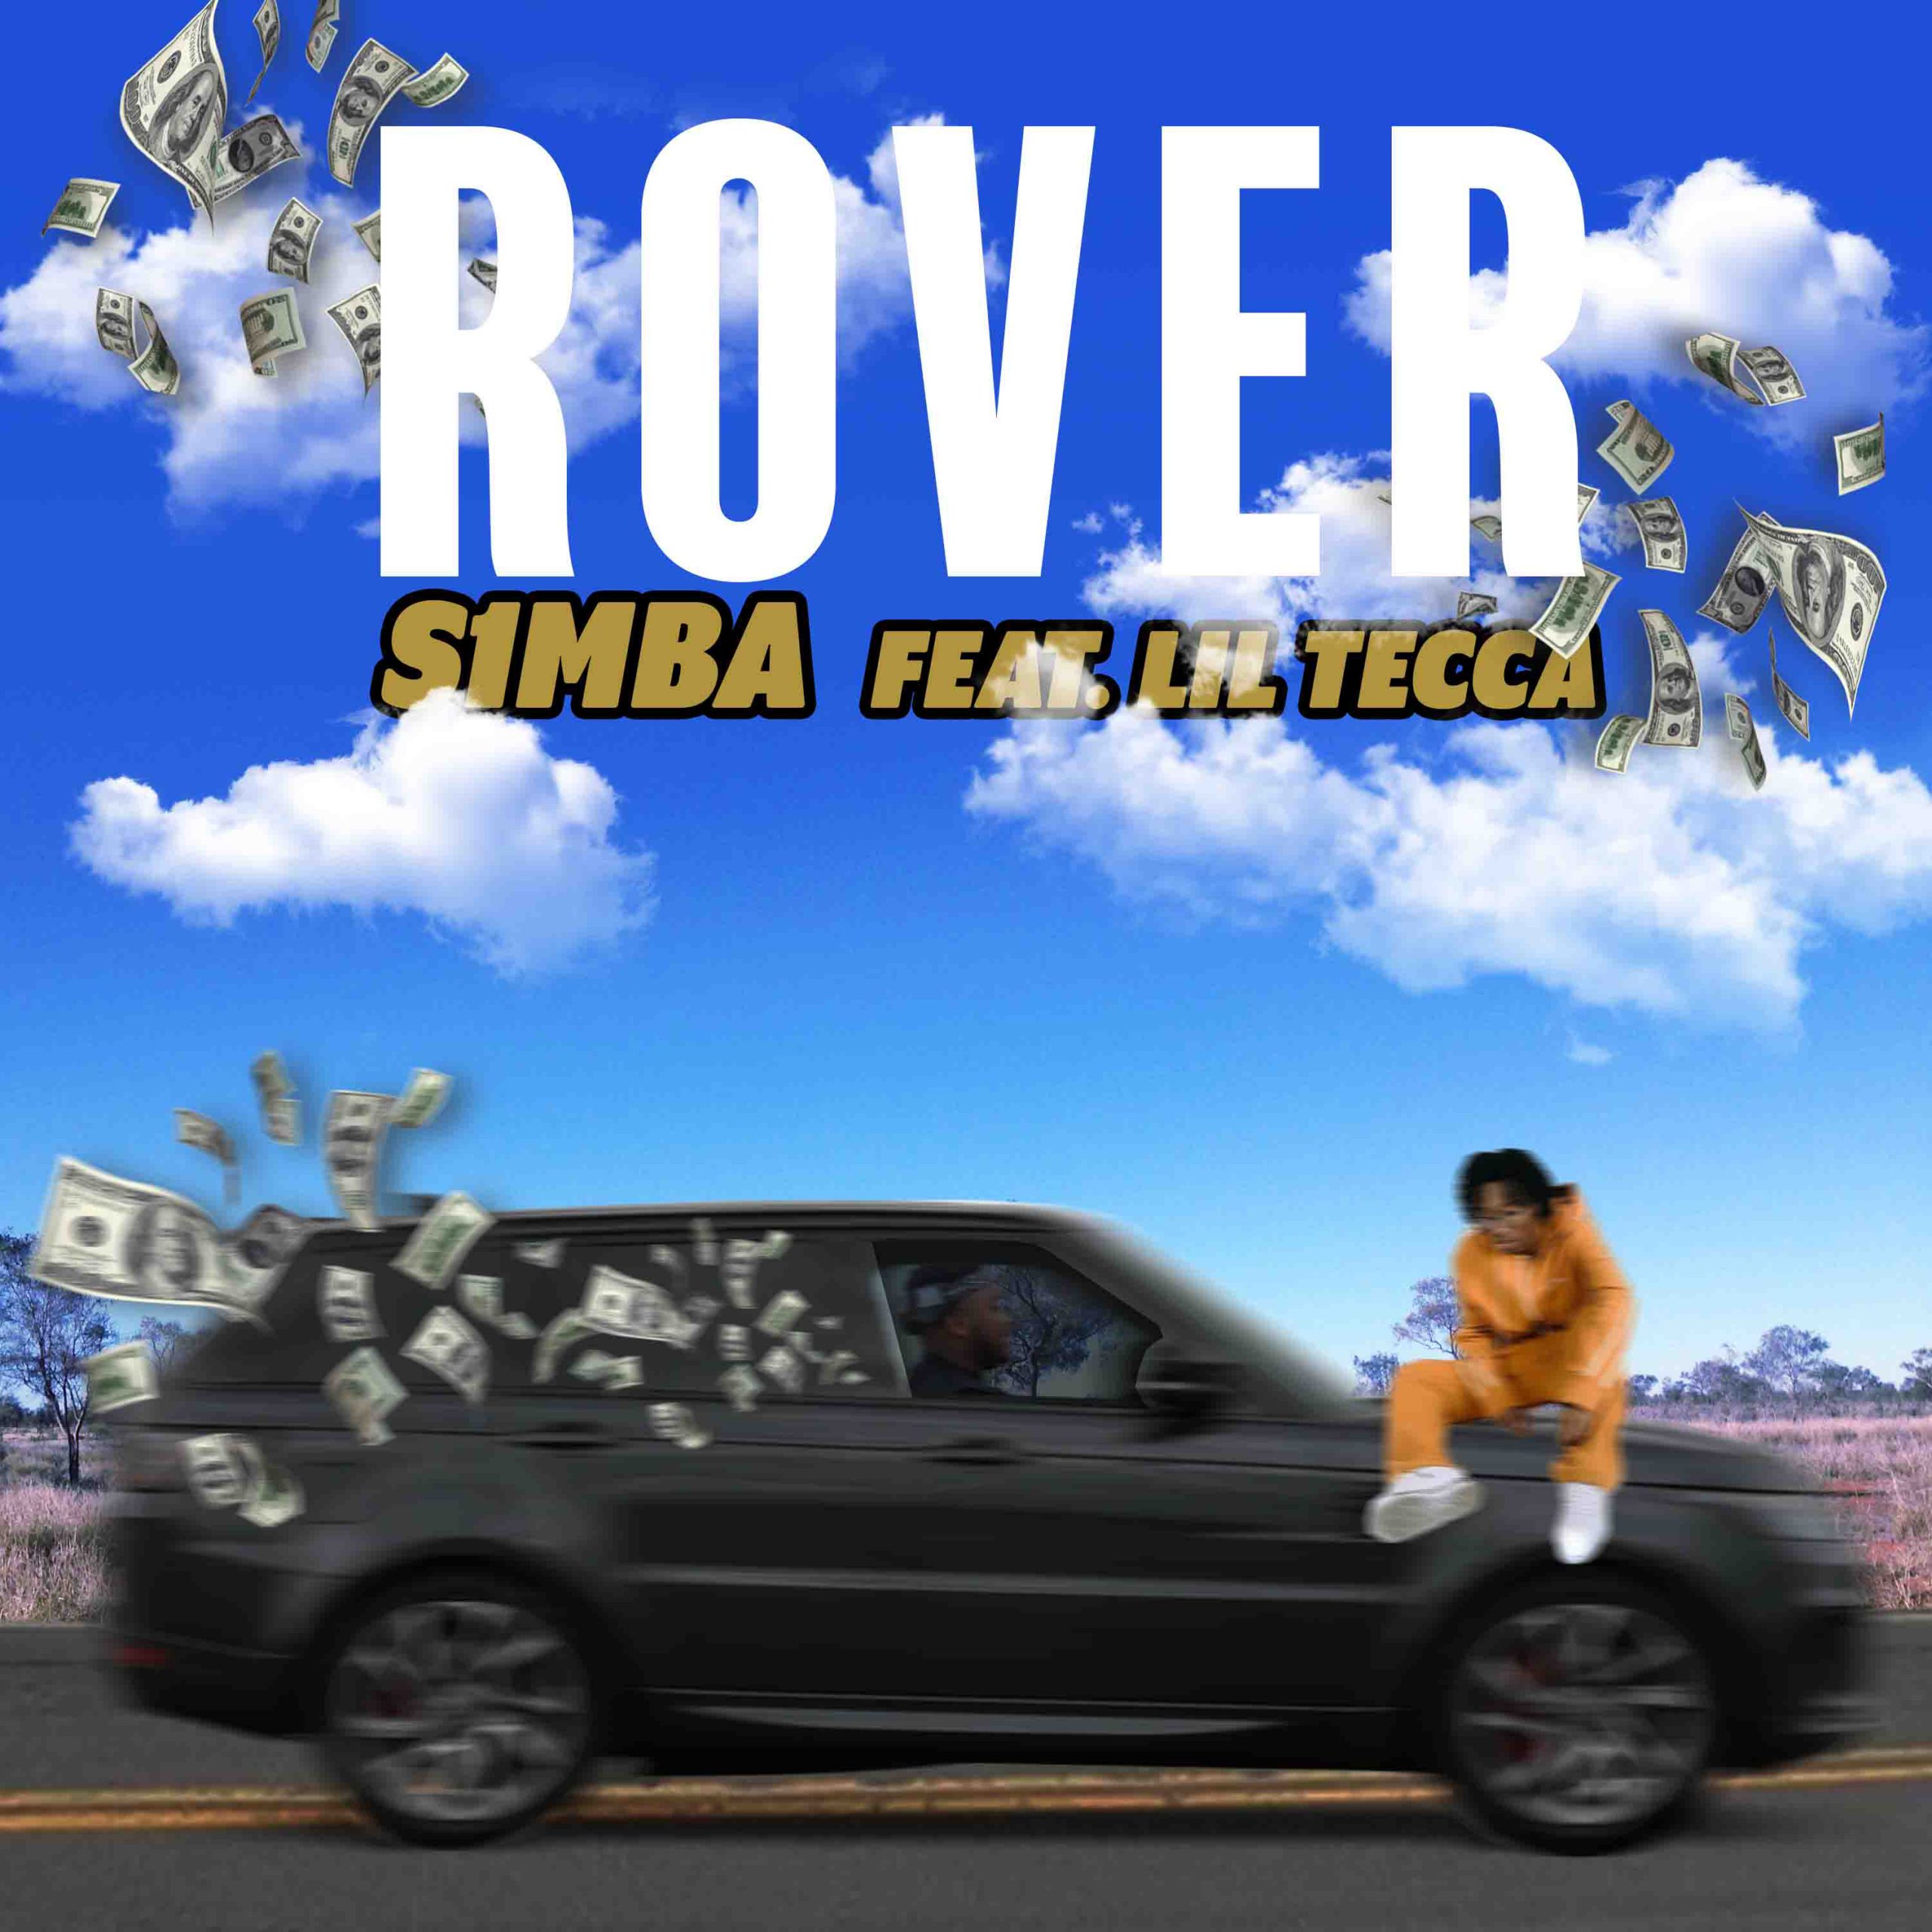 S1MBA ft Lil Tecca - Rover (Remix)